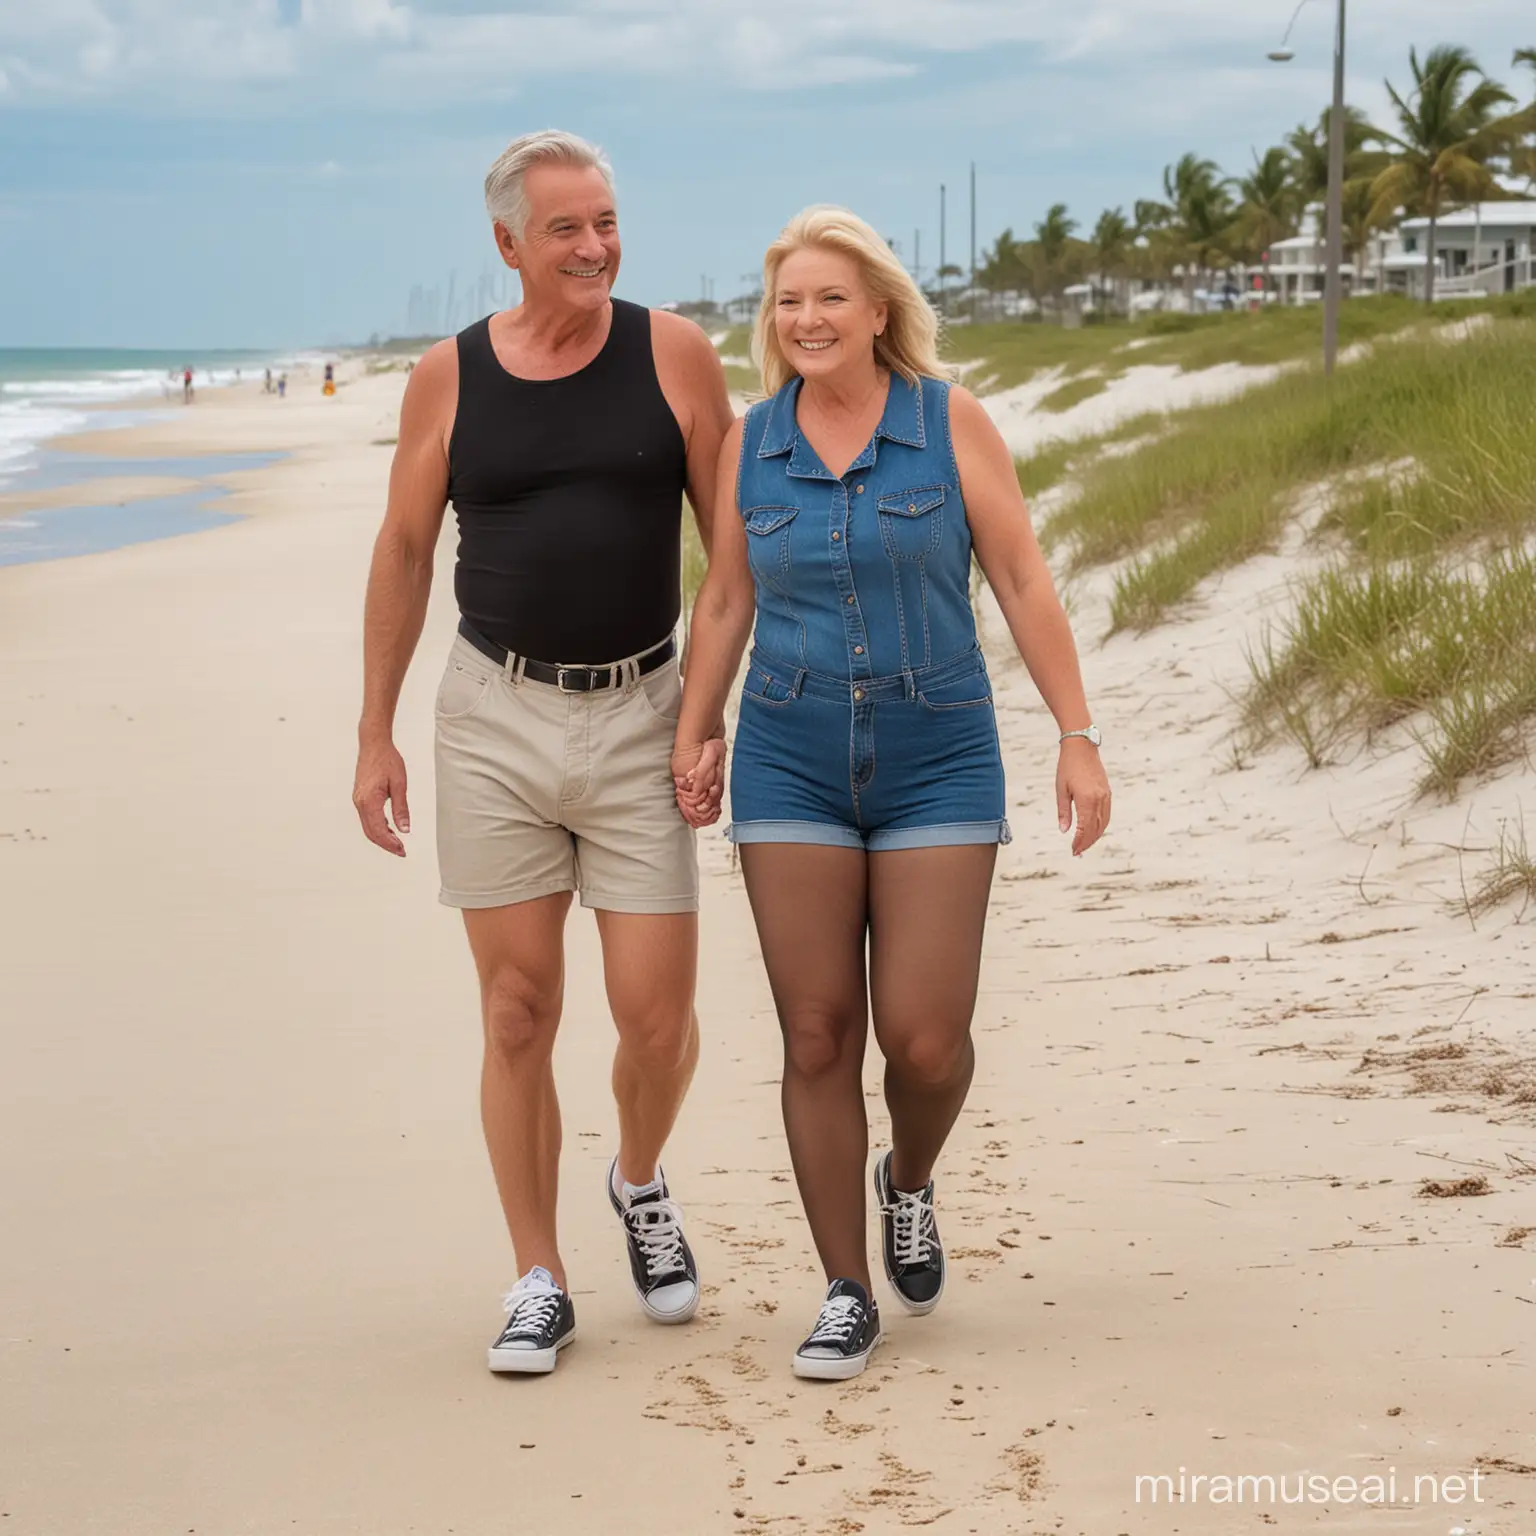 married couple, wife and husband, 60 year old lady, straight golden blonde hair, parted in middle, black pantyhose nylon tights, denim jean shorts, black tank top , white keds sneakers, walking on sandy Florida beach with 60 year old chubby male, short hair, long tan shorts